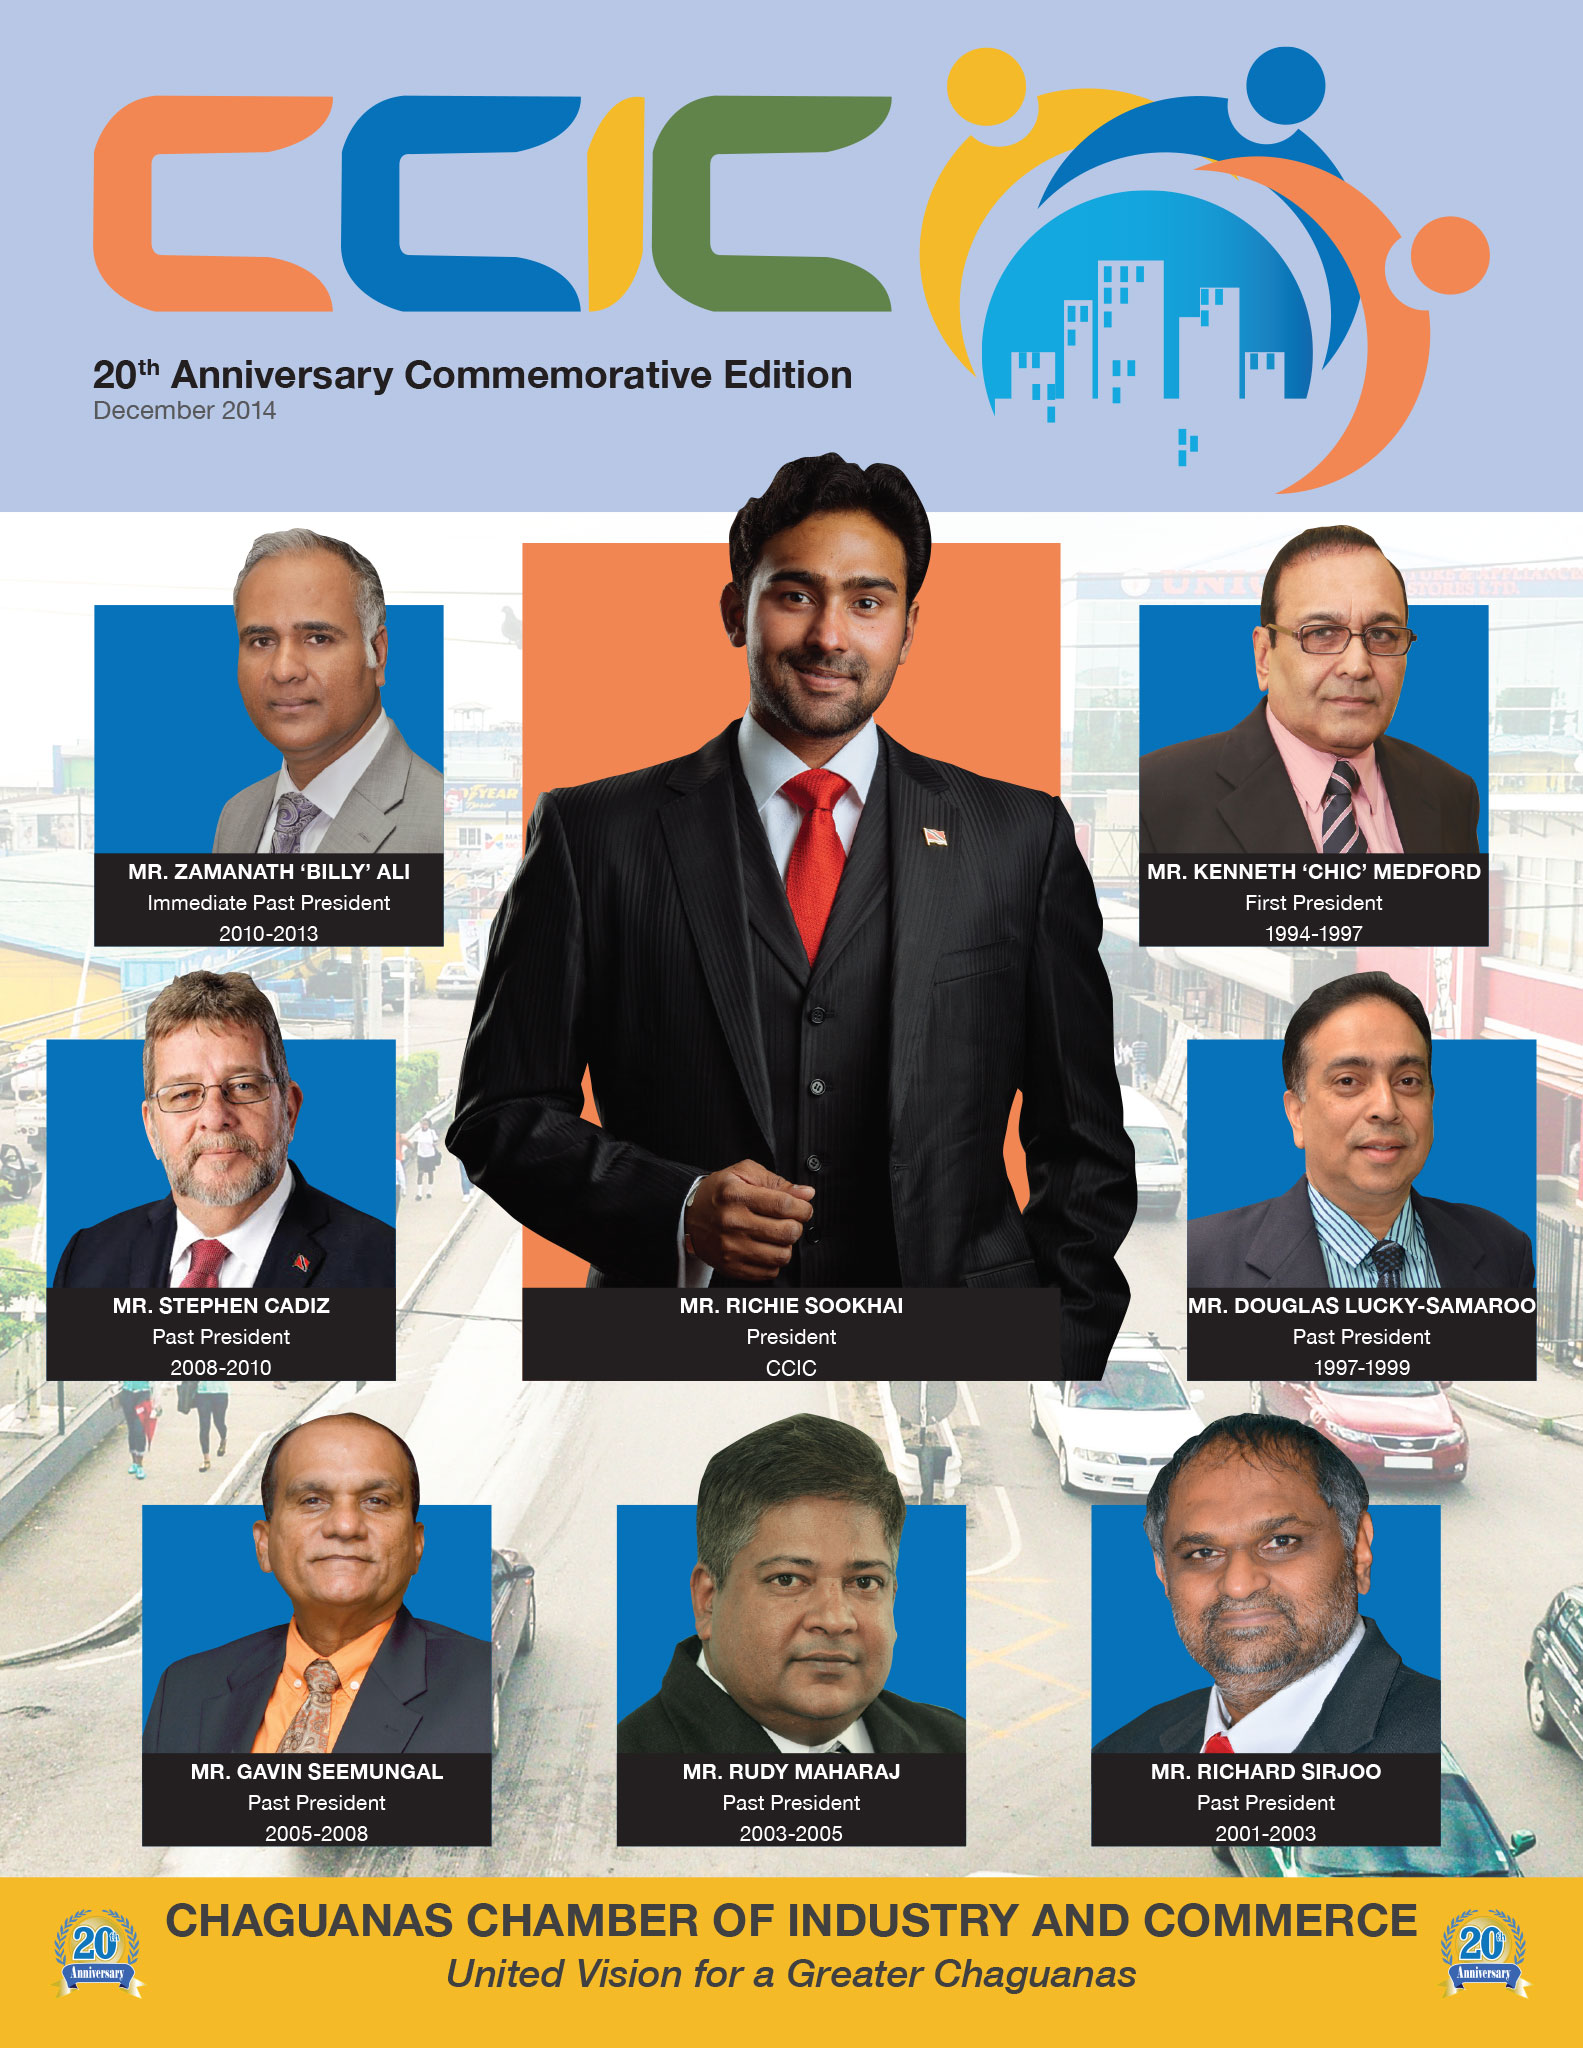 Chaguanas Chamber of Industry and Commerce 20th Anniversary Commemorative Magazine